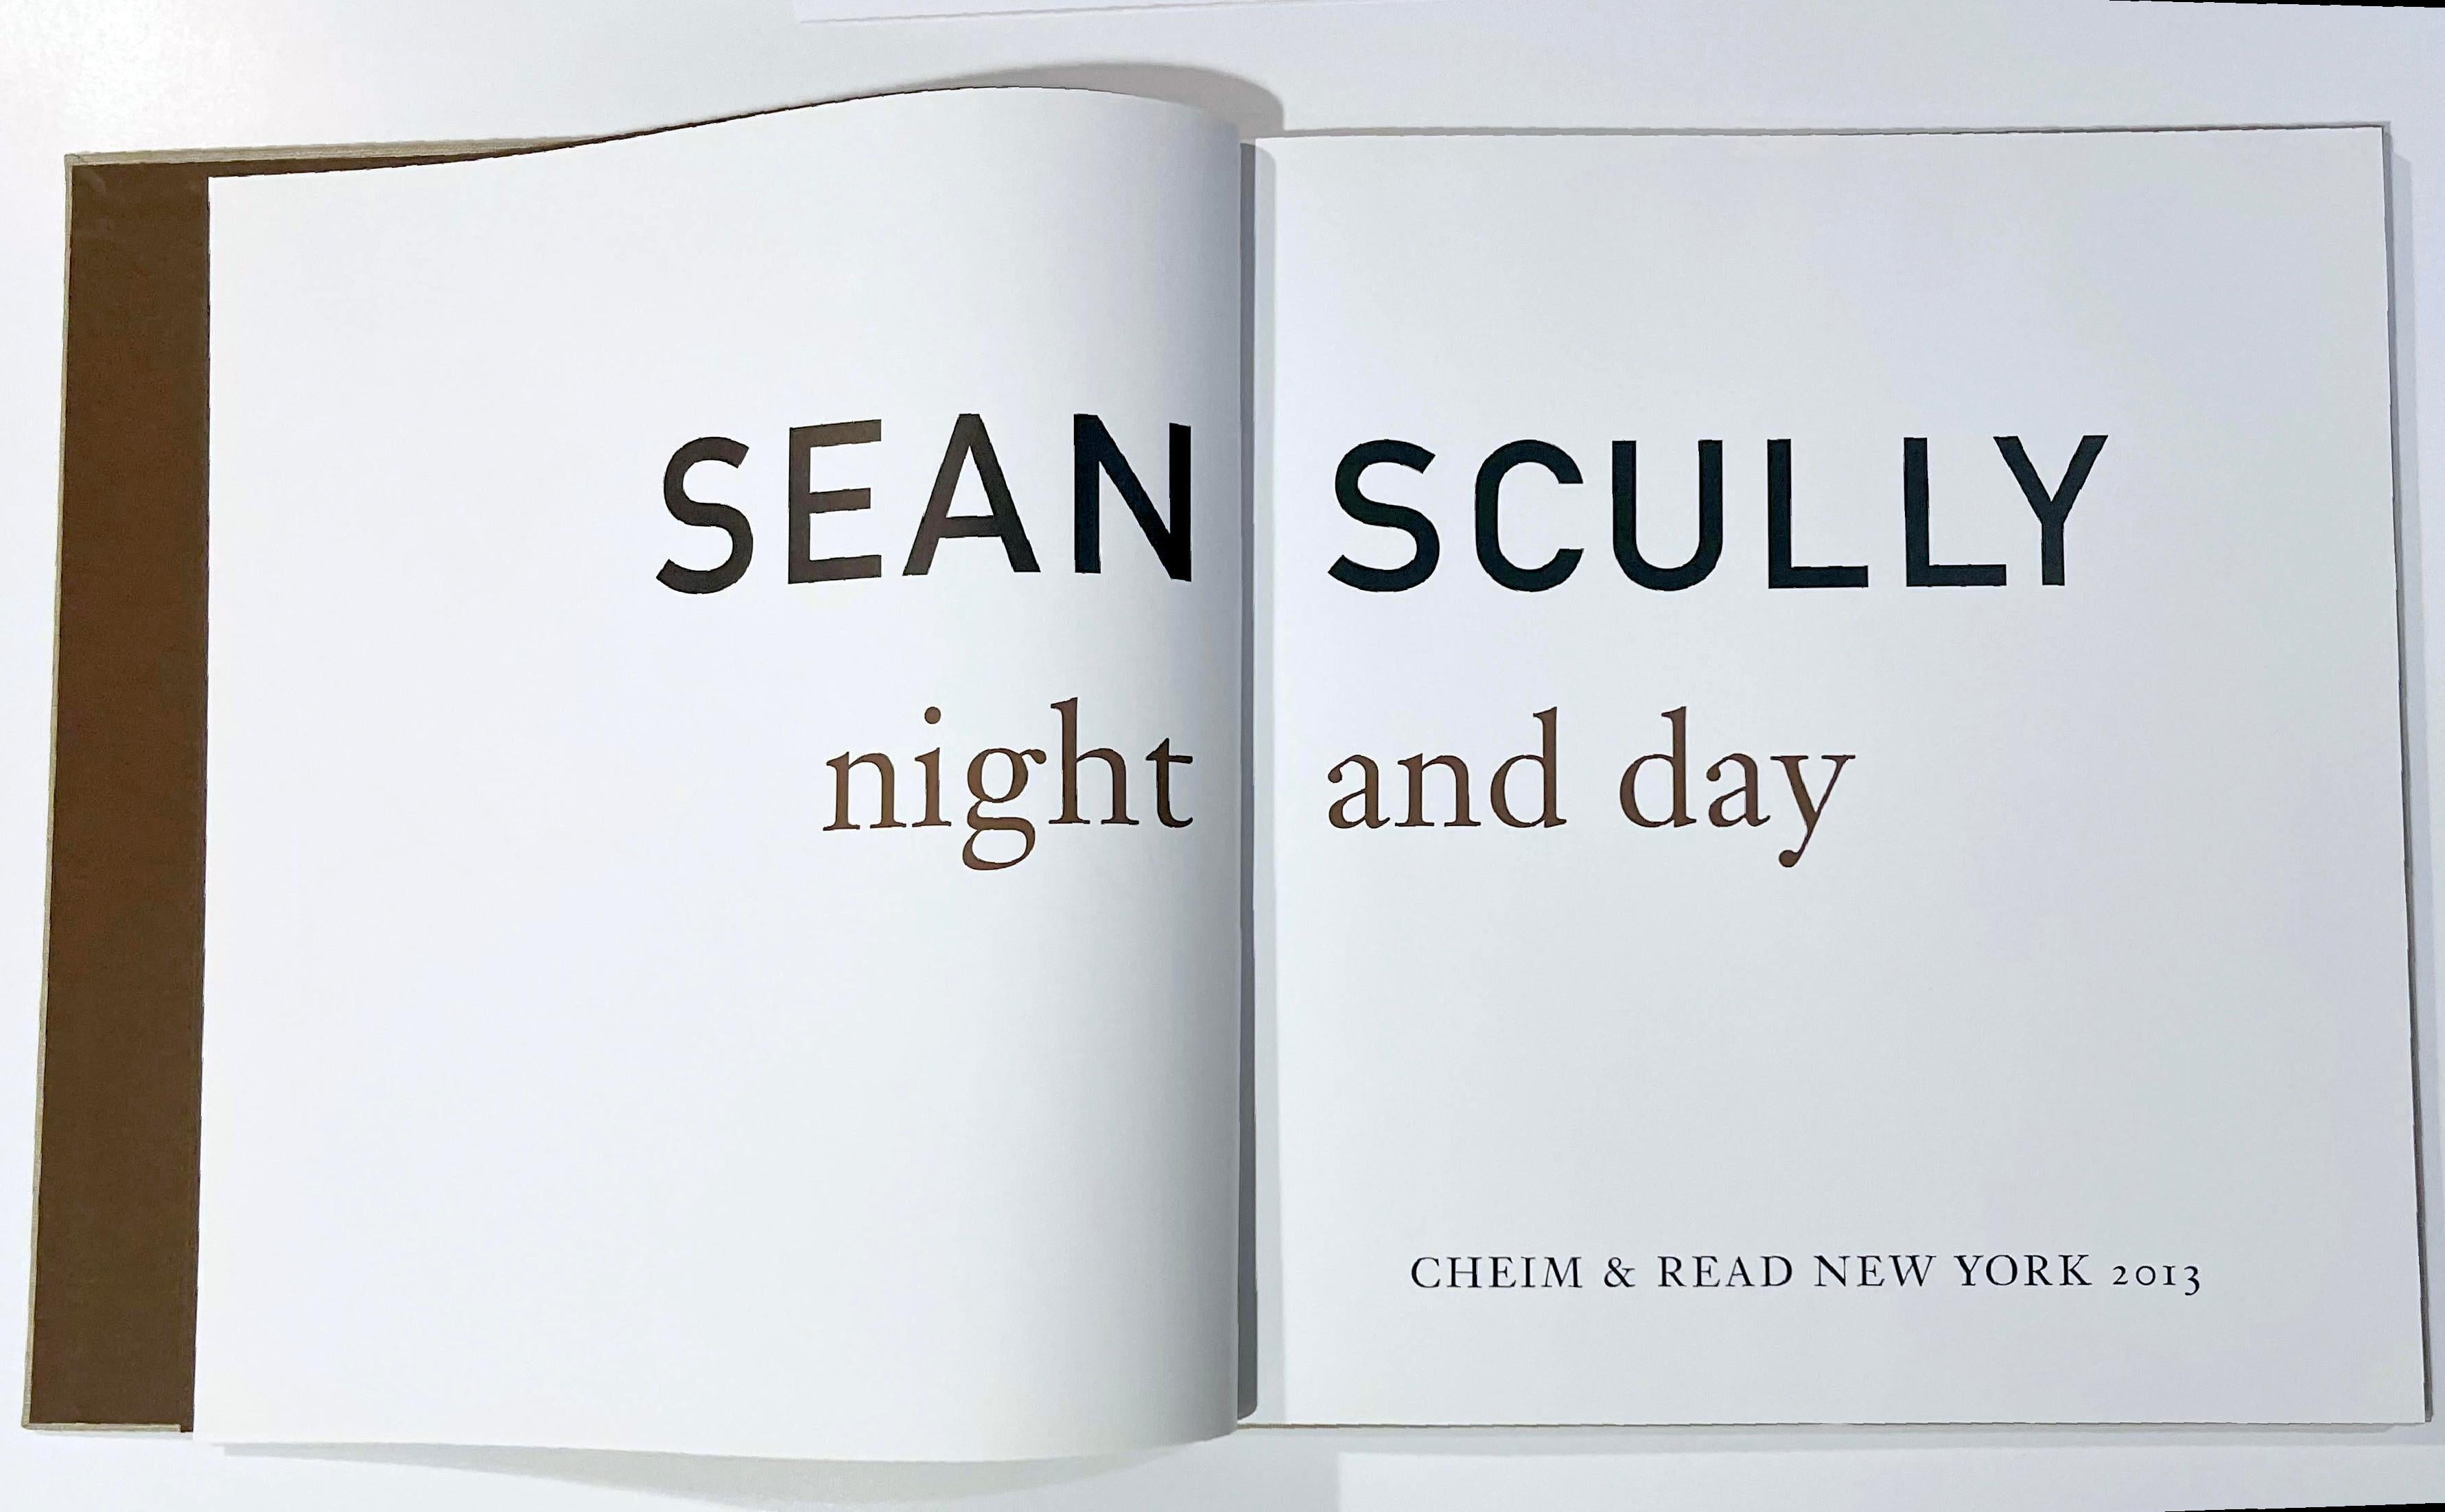 Sean Scully Night and Day (hardback monograph, hand signed by Sean Scully) For Sale 3